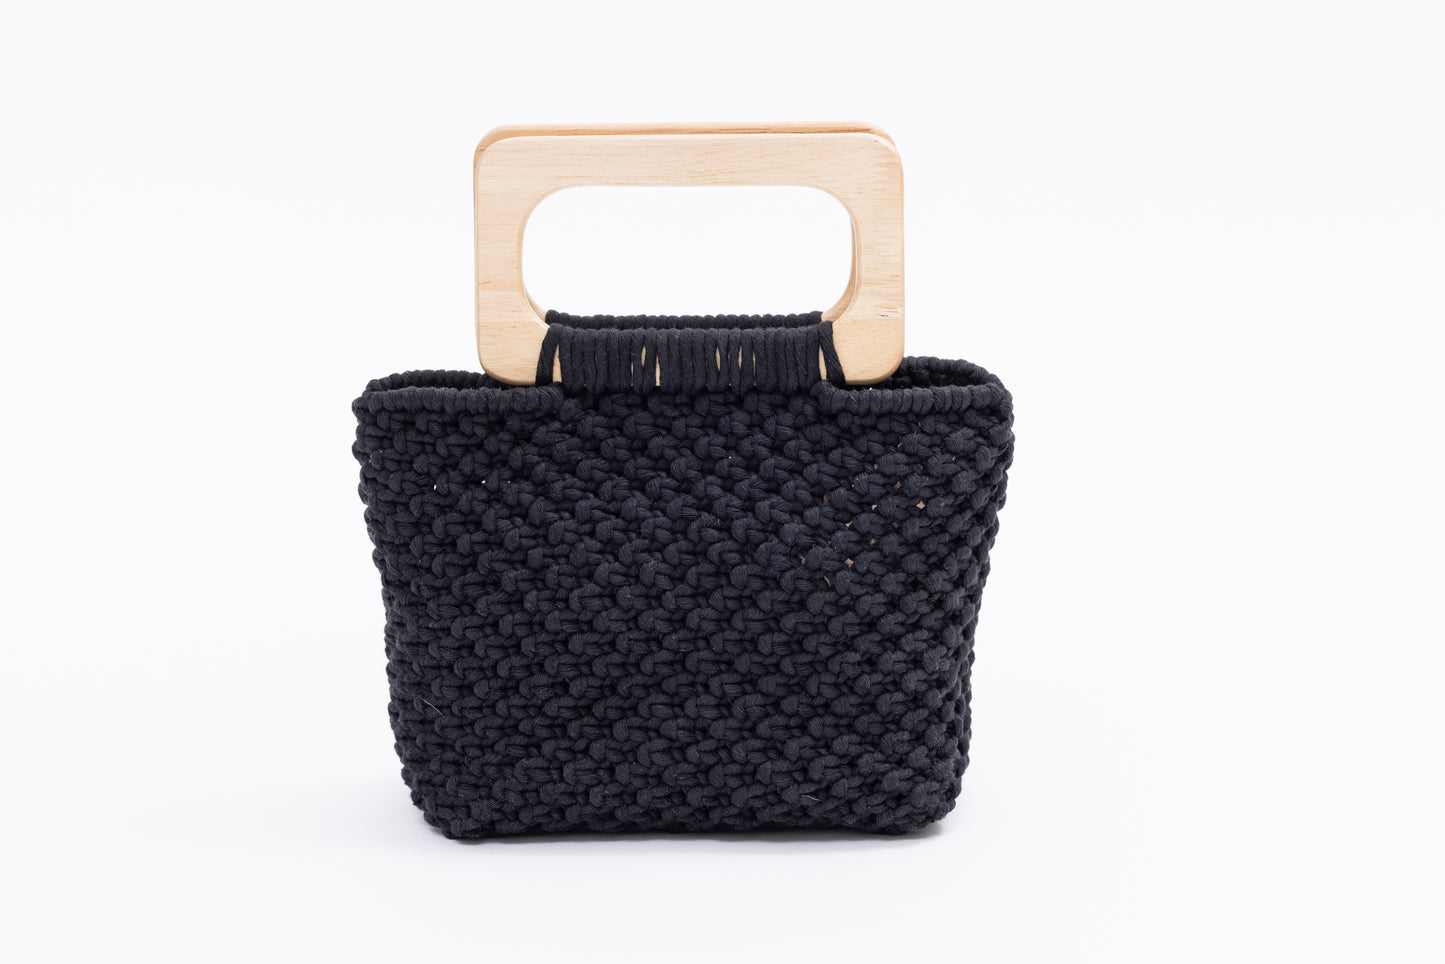 Black tote with light wood with rectangle handles